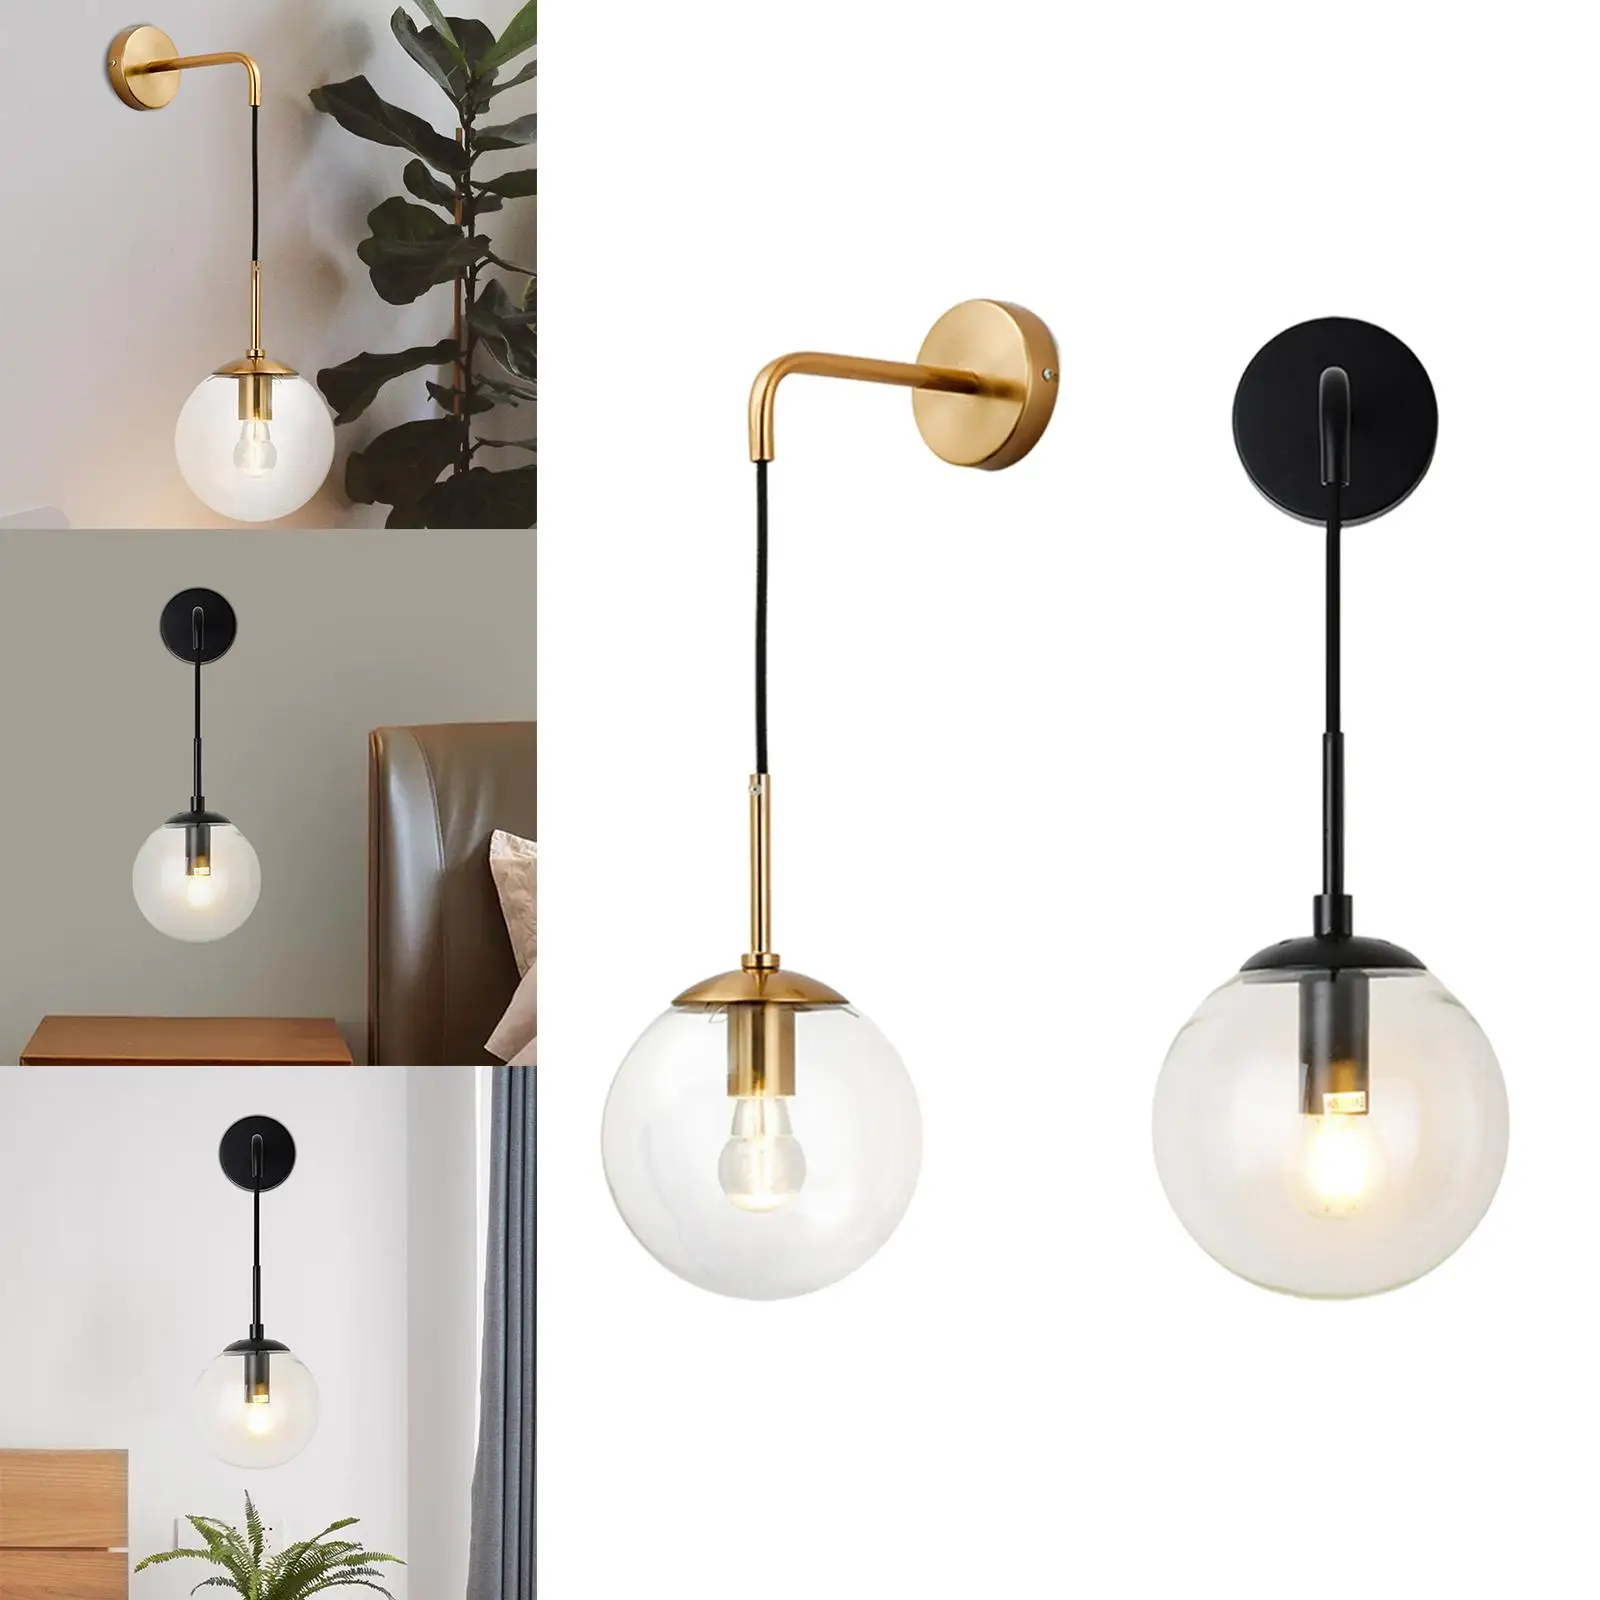 Nordic Modern Glass Ball Wall Lamps Retro Simple Bedside Living Room Decoration Lights Corridor Staircase LED Lighting Fixtures